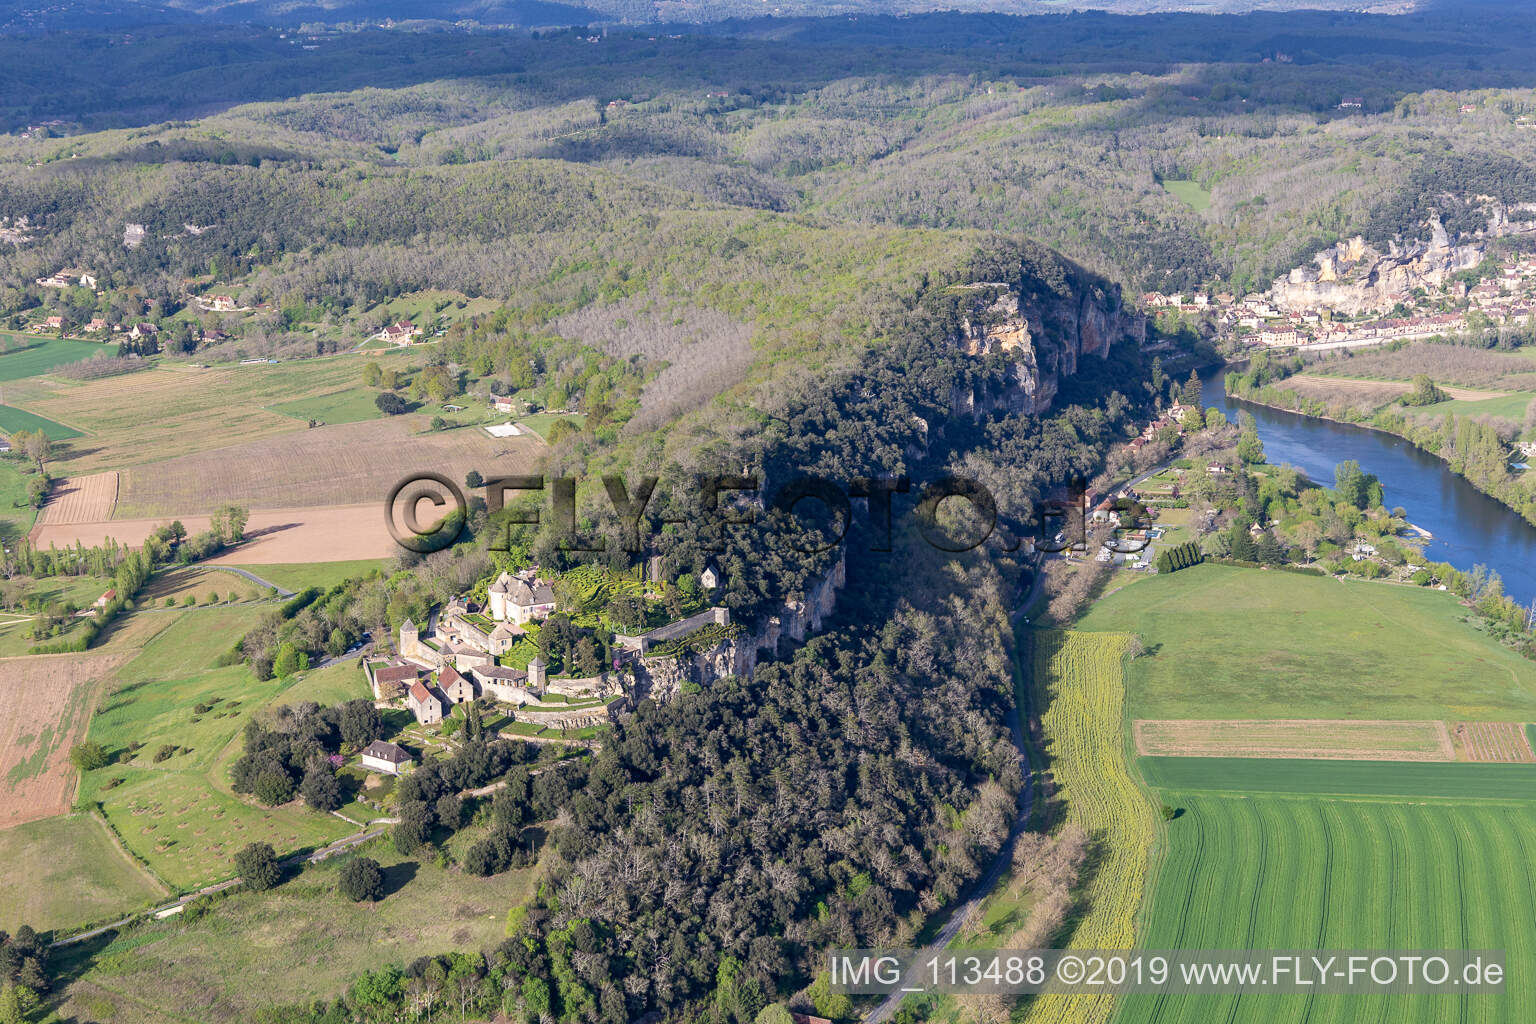 Jardins de Marqueyssac in Vézac in the state Dordogne, France from above